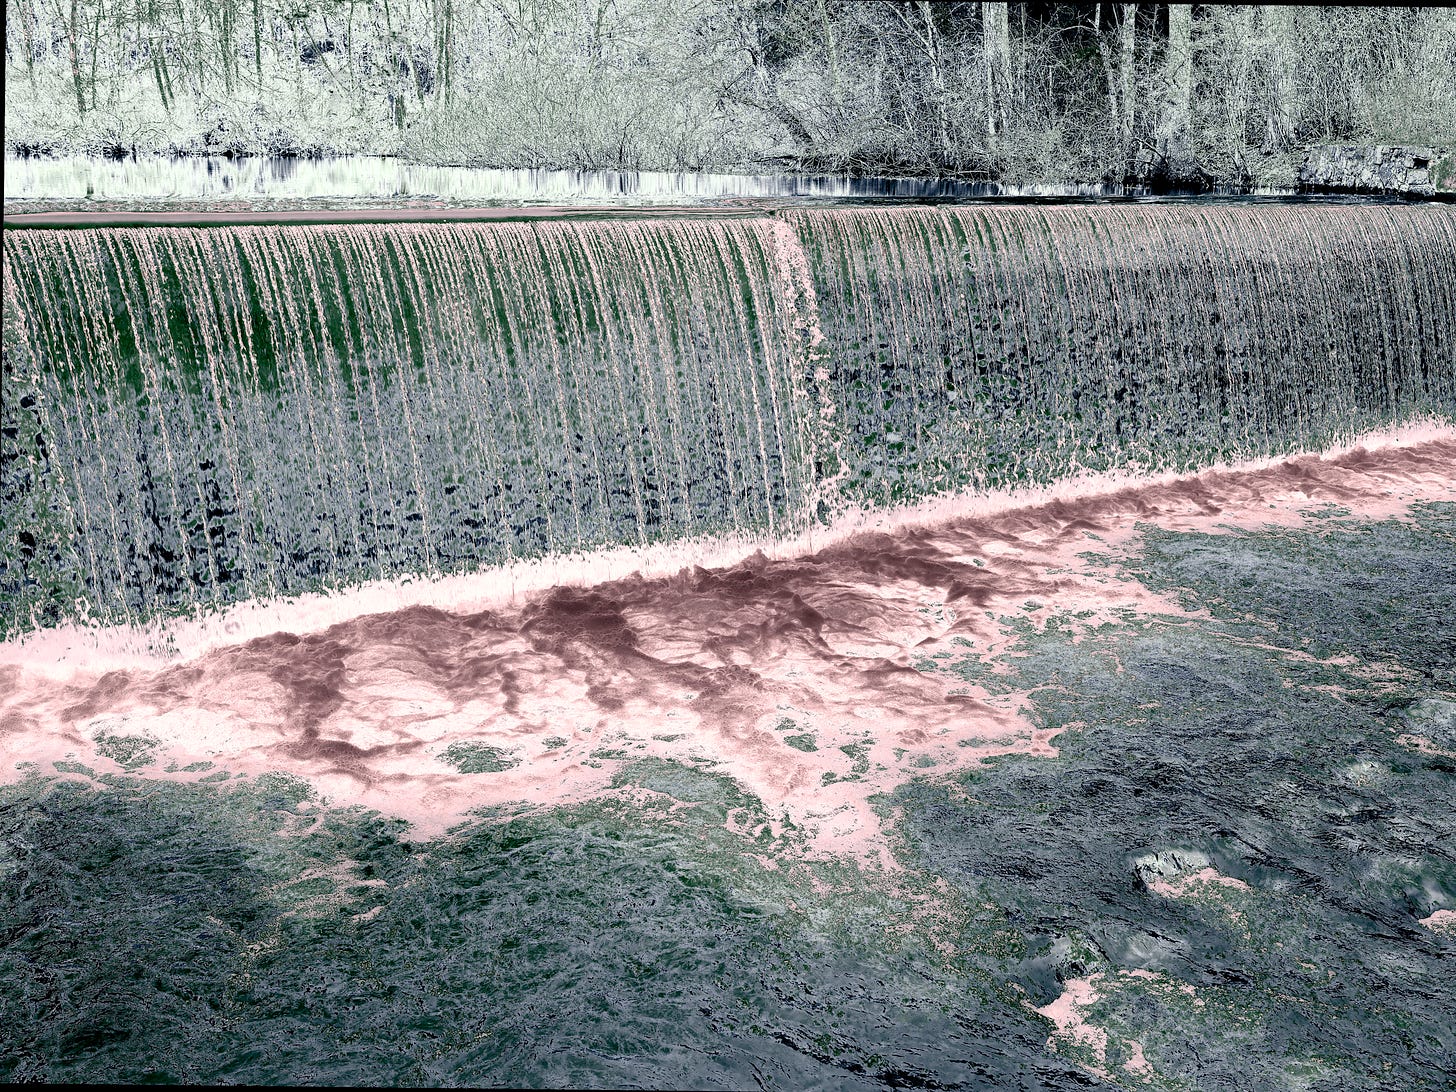 ghostly image of a river spillway in winter